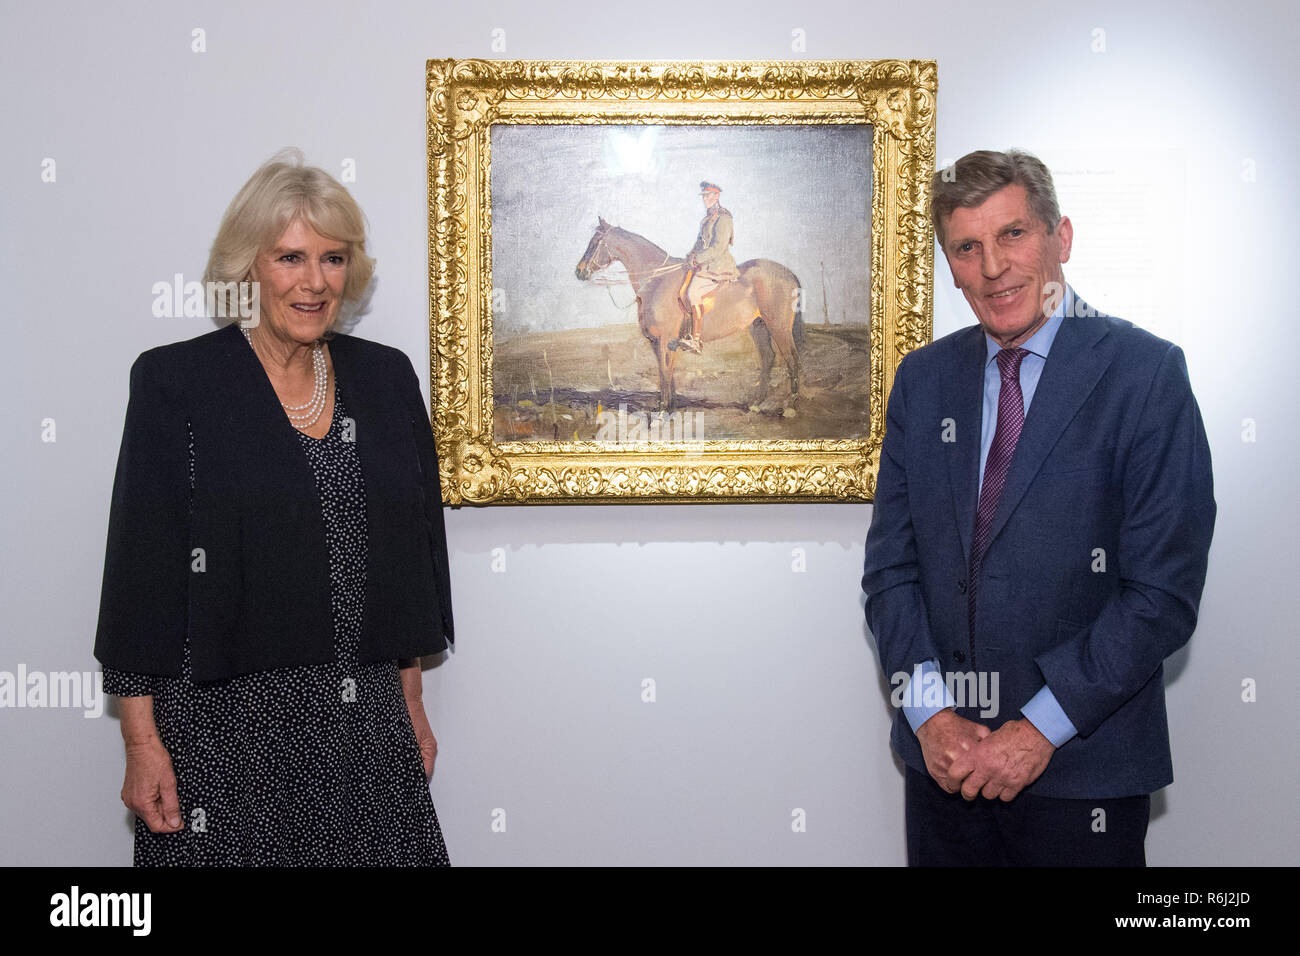 The Duchess of Cornwall views the painting 'Major-General The Right Honourable J.E.B. Seely' alongside Seely's grandson Brough Scott, during a visit to the 'Alfred Munnings: War Artist, 1918' exhibition, at the National Army Museum, in London, which features over forty works of art by the war artist that have been brought together for the first time in a century. Stock Photo